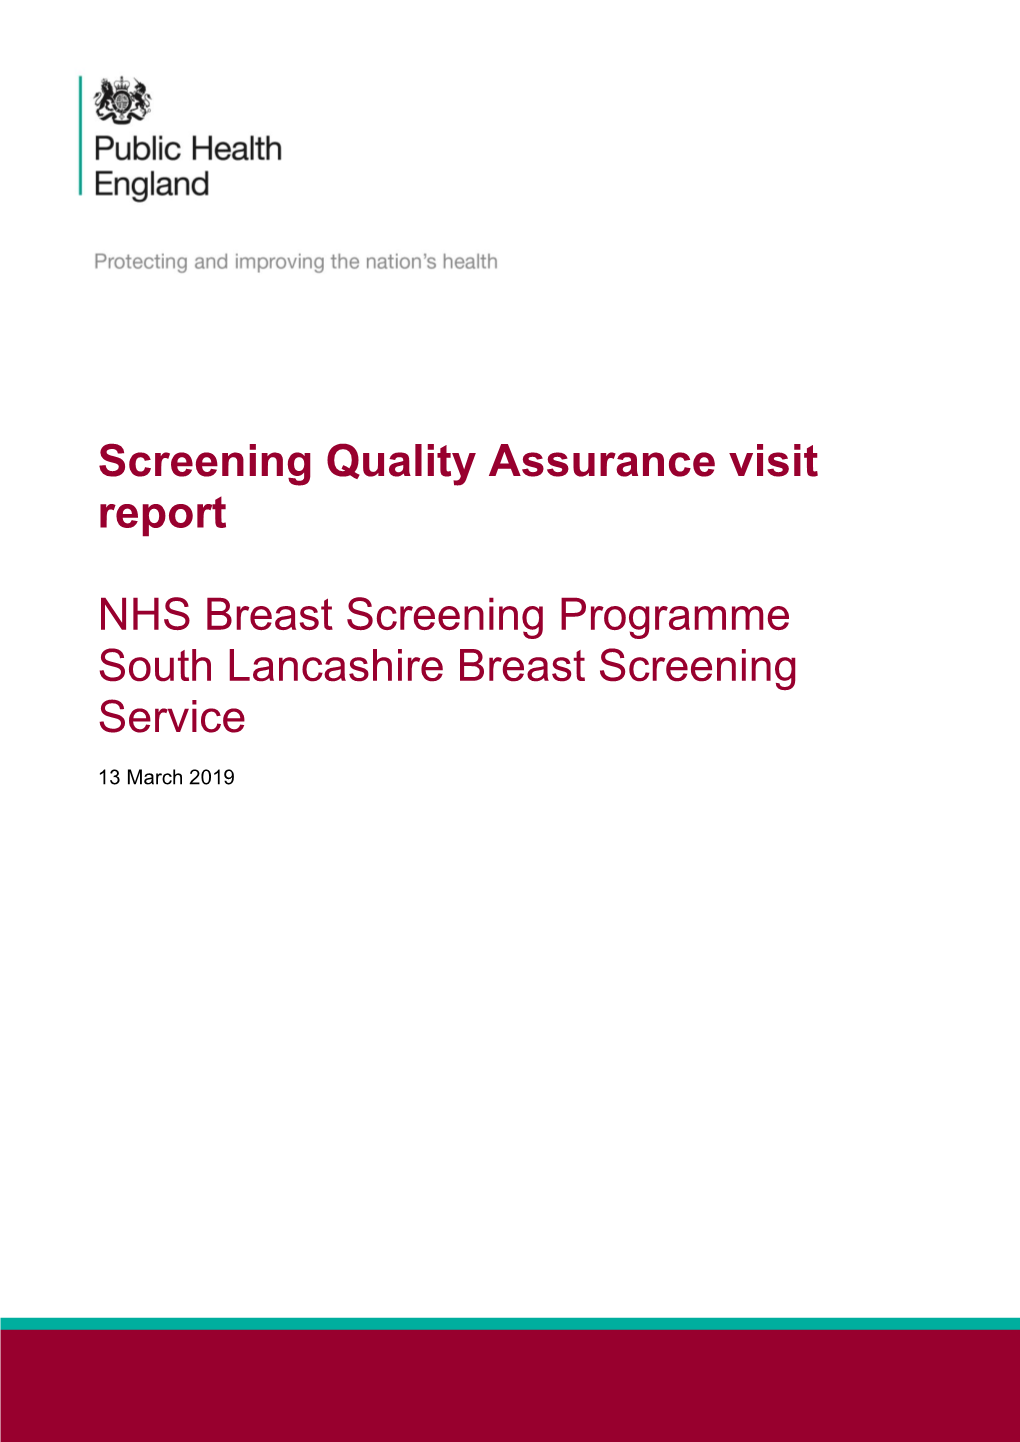 Screening Quality Assurance Visit Report: NHS Breast Screening Programme – March 2019